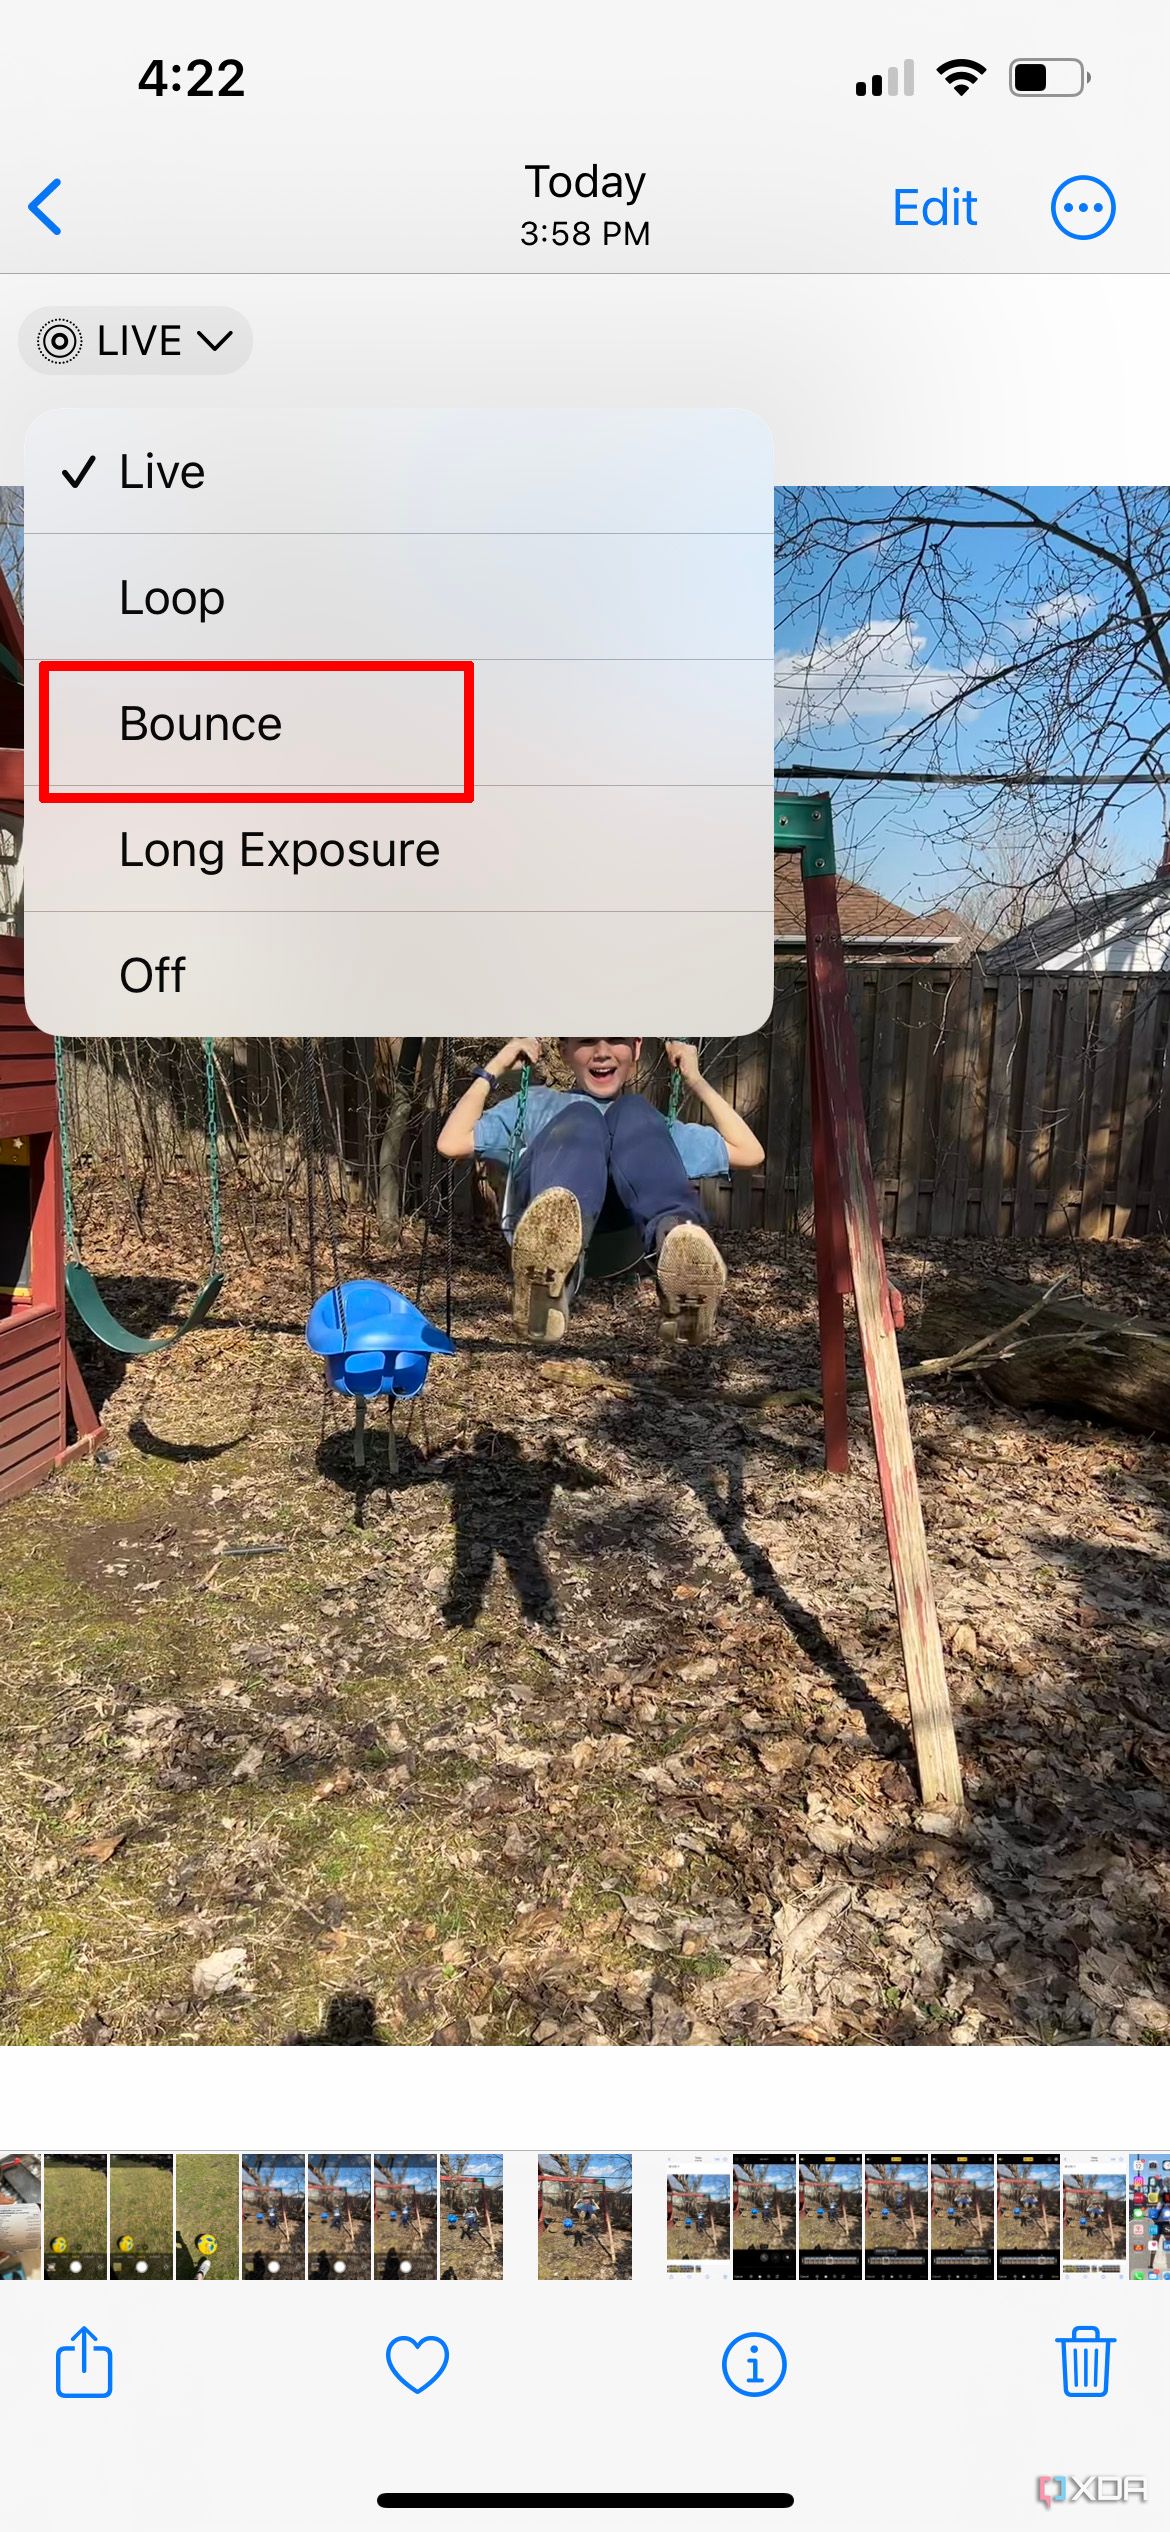 iPhone photo in frame of a young boy on a swing with the Bounce effect selected.